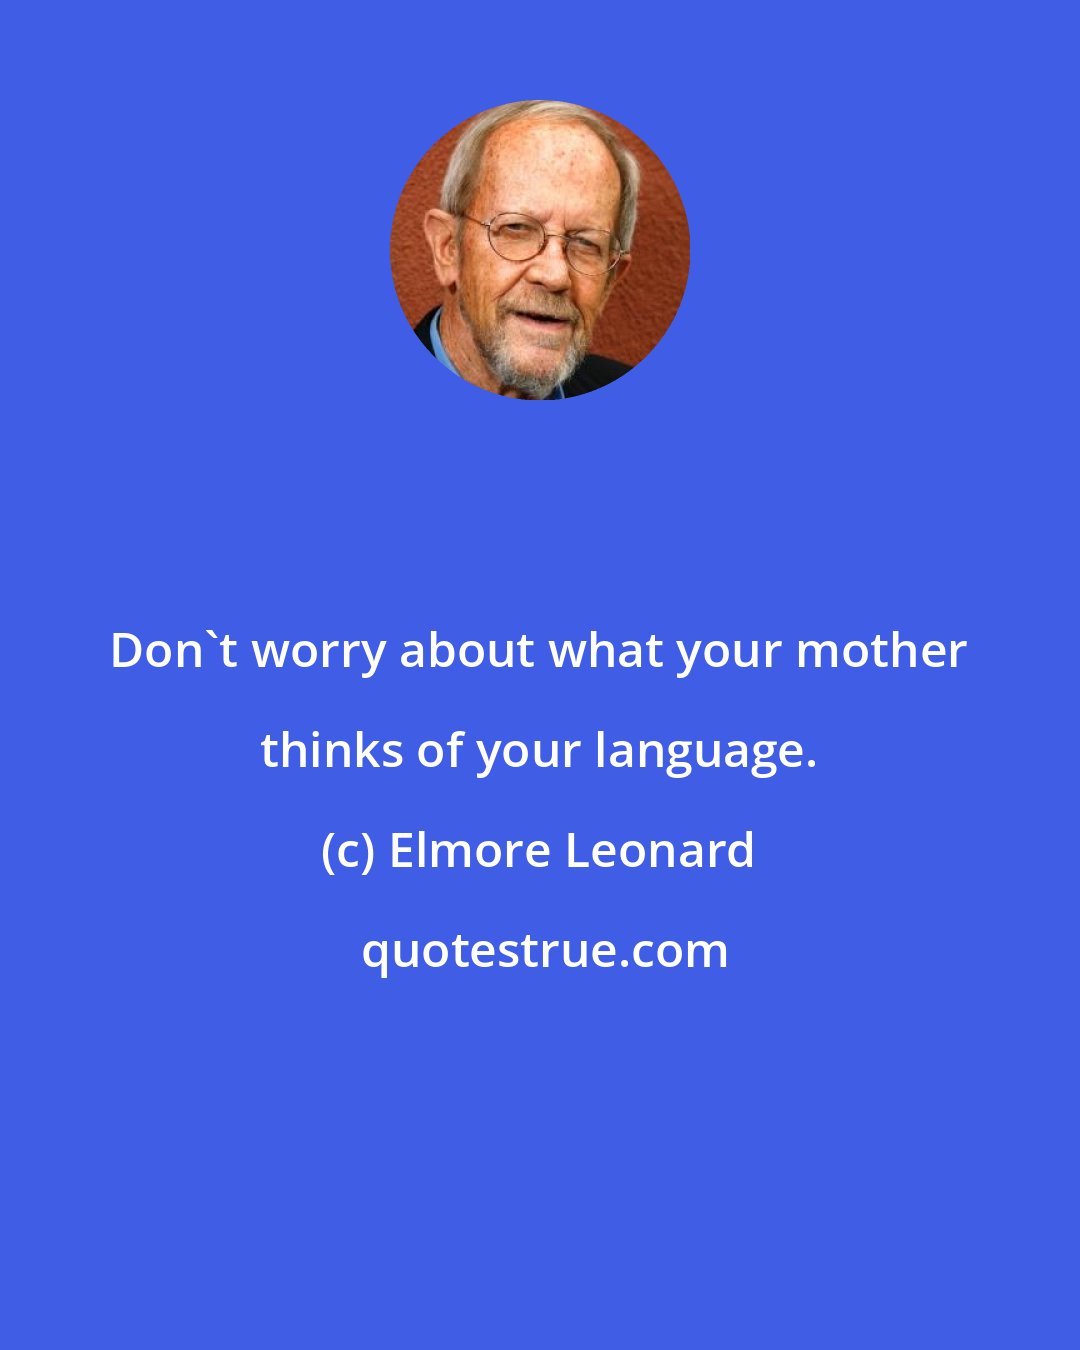 Elmore Leonard: Don't worry about what your mother thinks of your language.